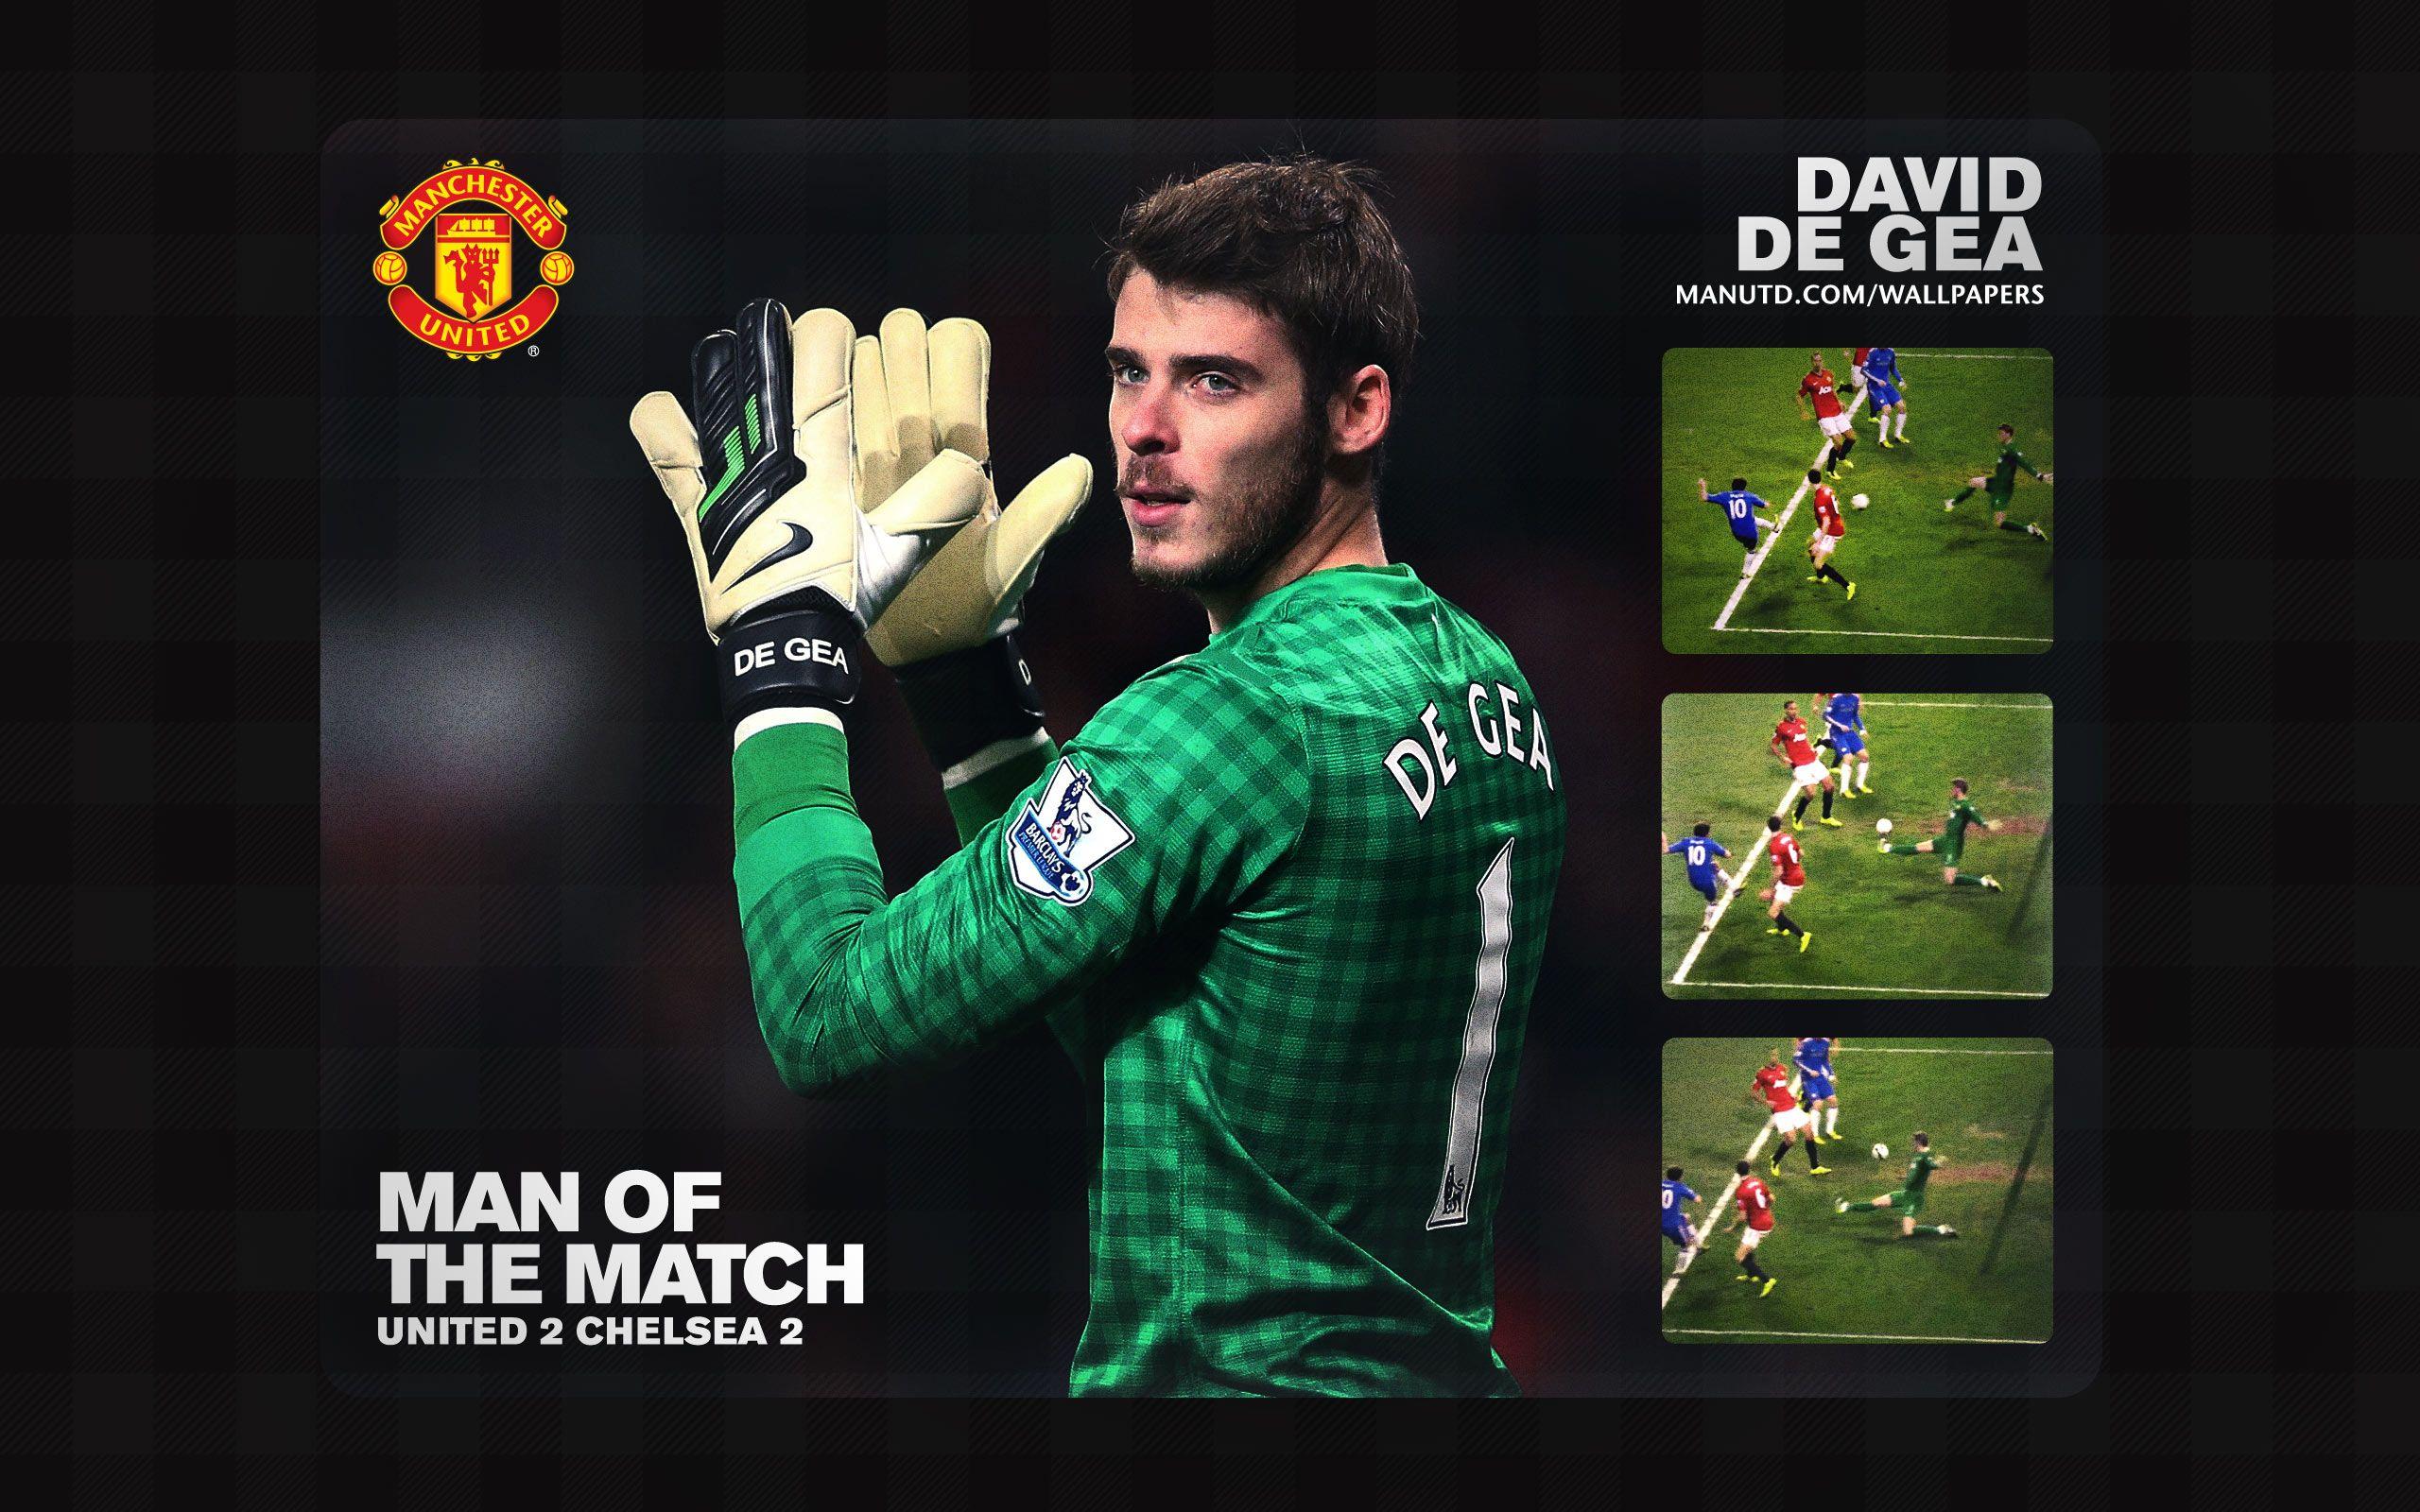 De Gea: Man Of The Match Manchester United vs Chelsea, Old Trafford